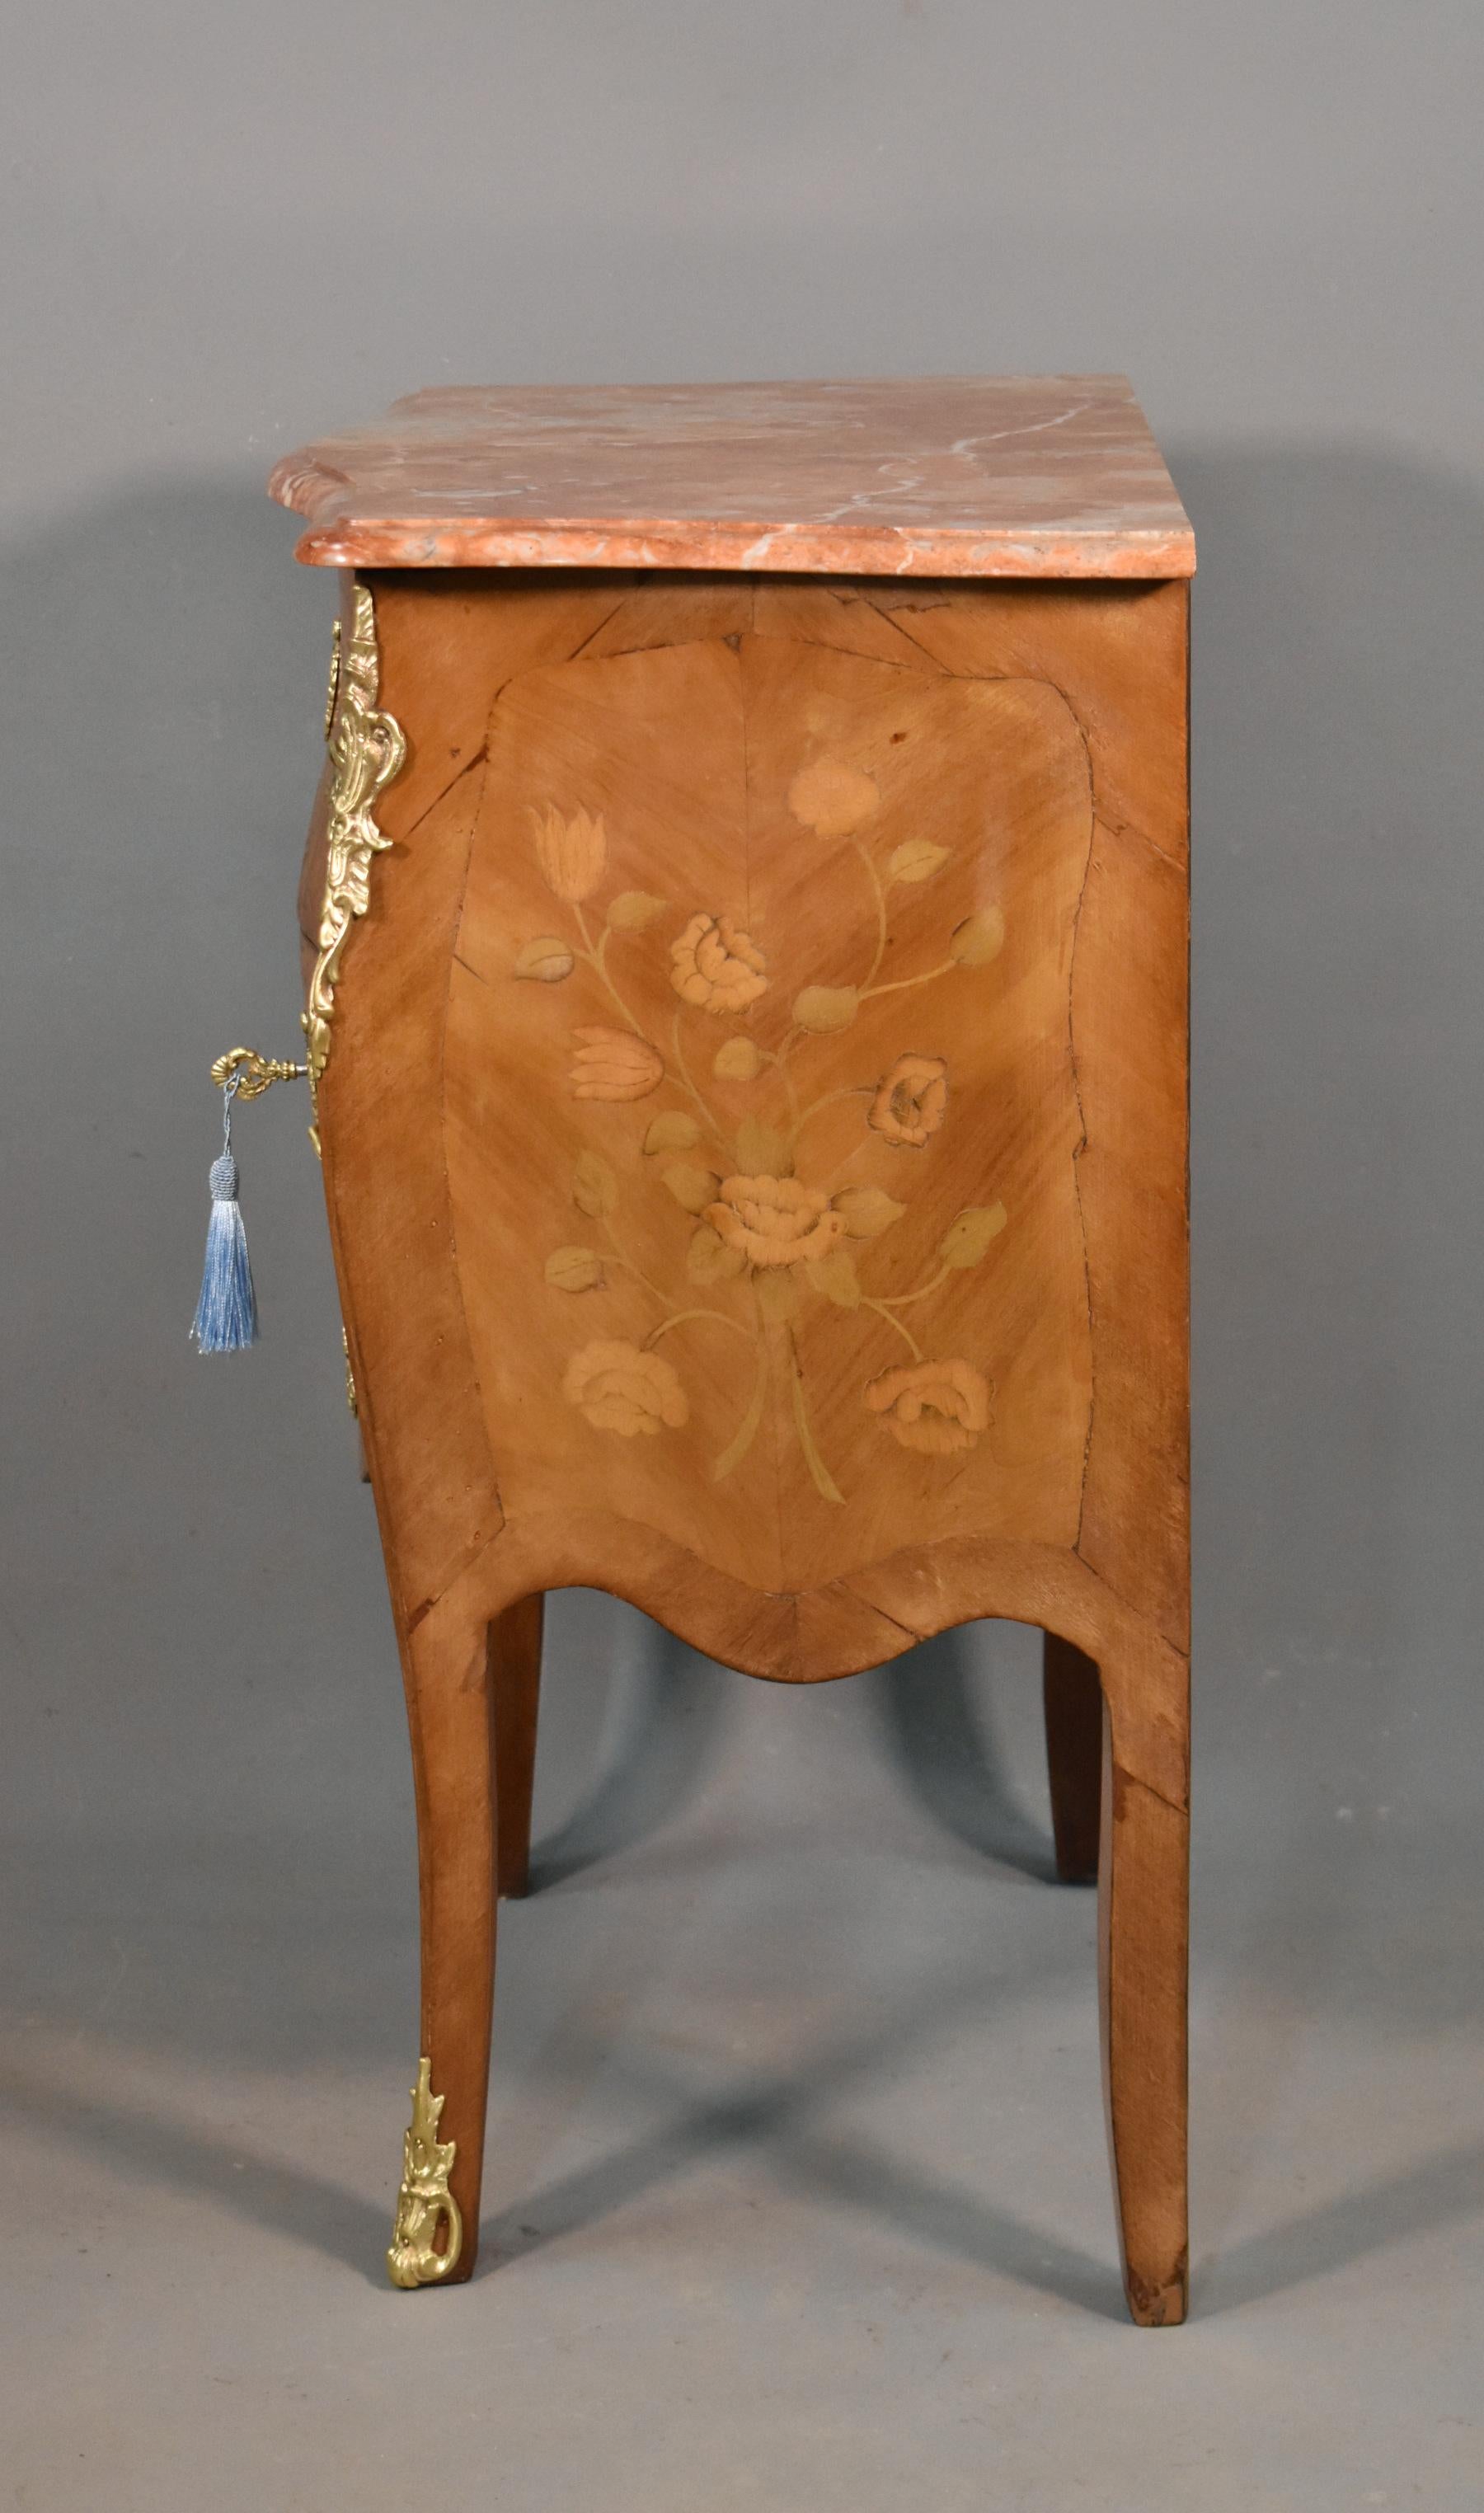 Antique French Louis XV Revival Marquetry Bombe Commode 19C For Sale 8